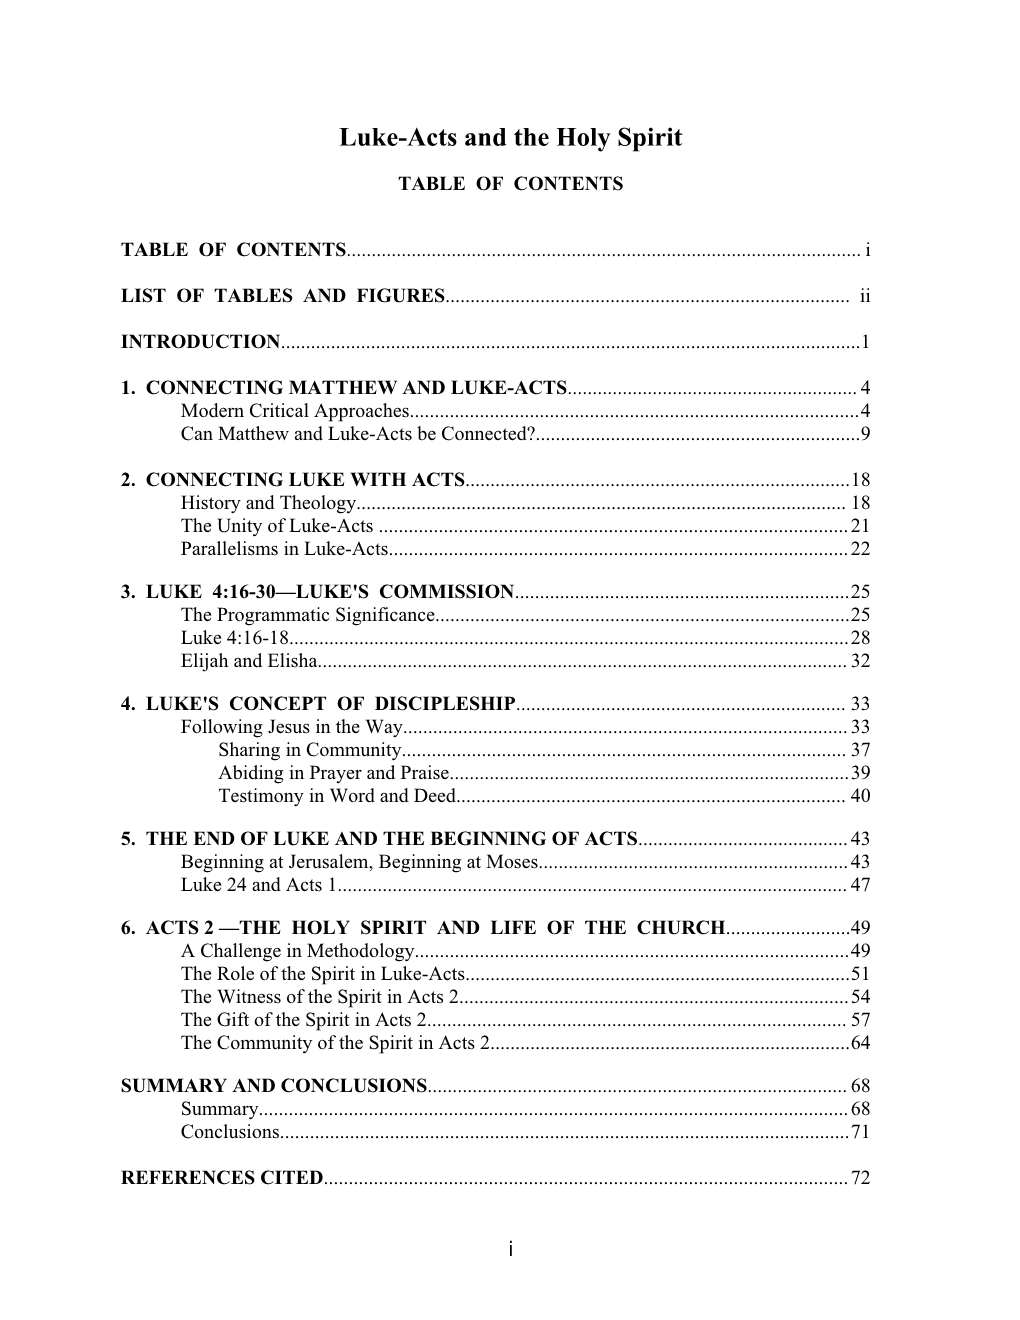 Table of Contents s493